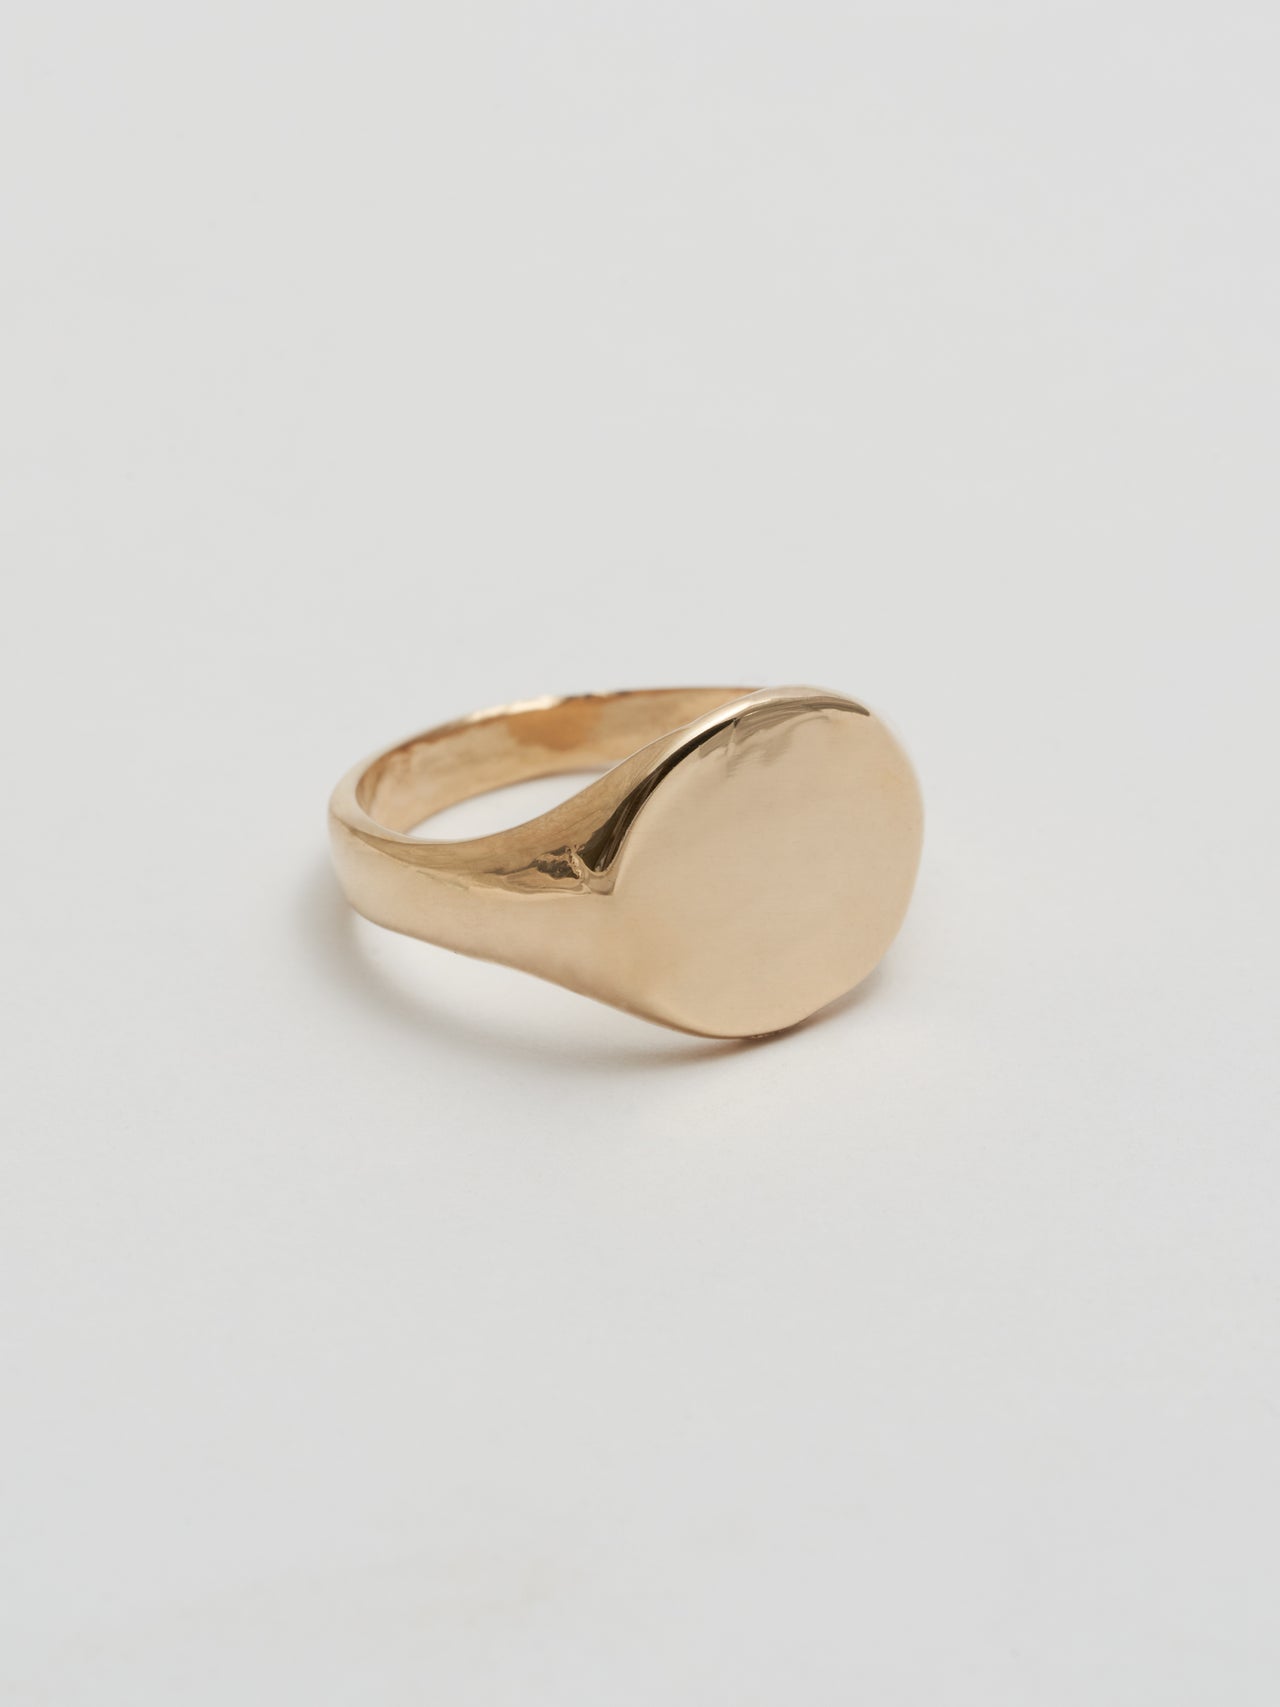 Side Shot of Baby Signet Ring: 14Kt Yellow Gold Signet Ring ID Signet with a 10mm Diameter